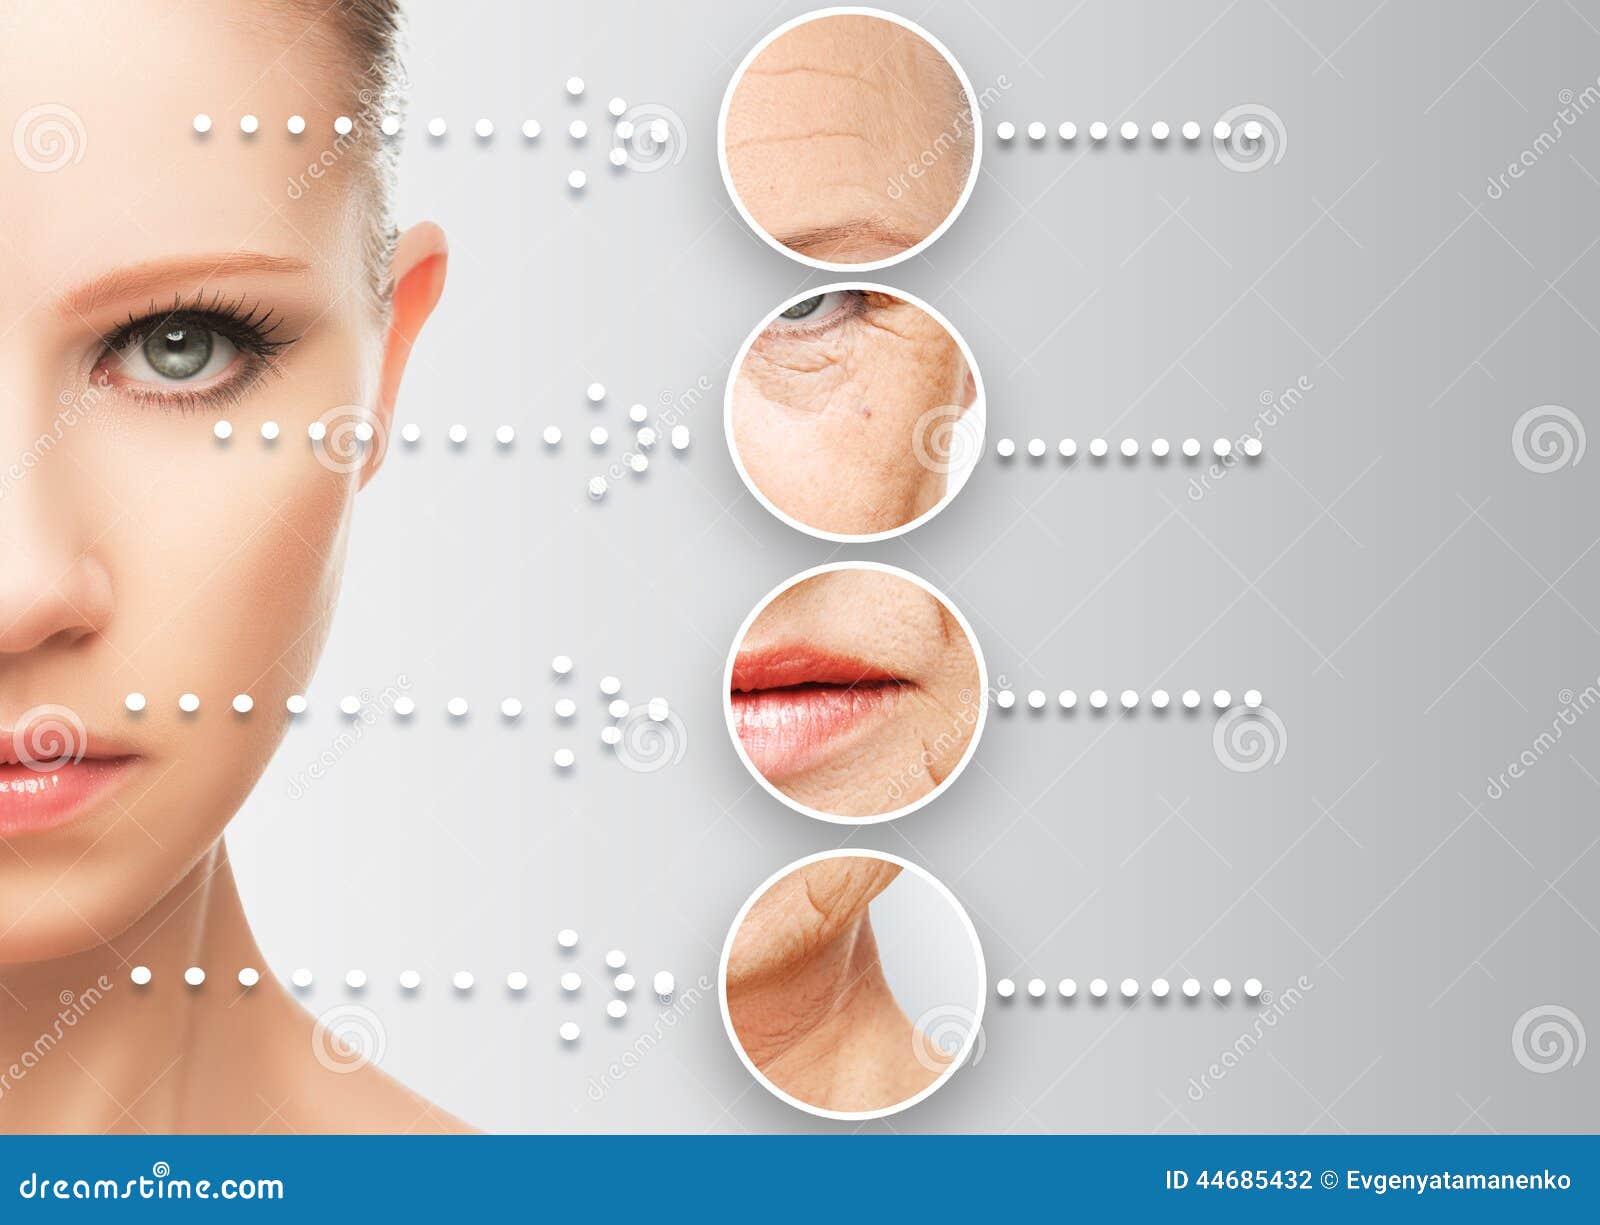 Beauty Concept Skin Aging Anti Aging Procedures Stock Photo Image